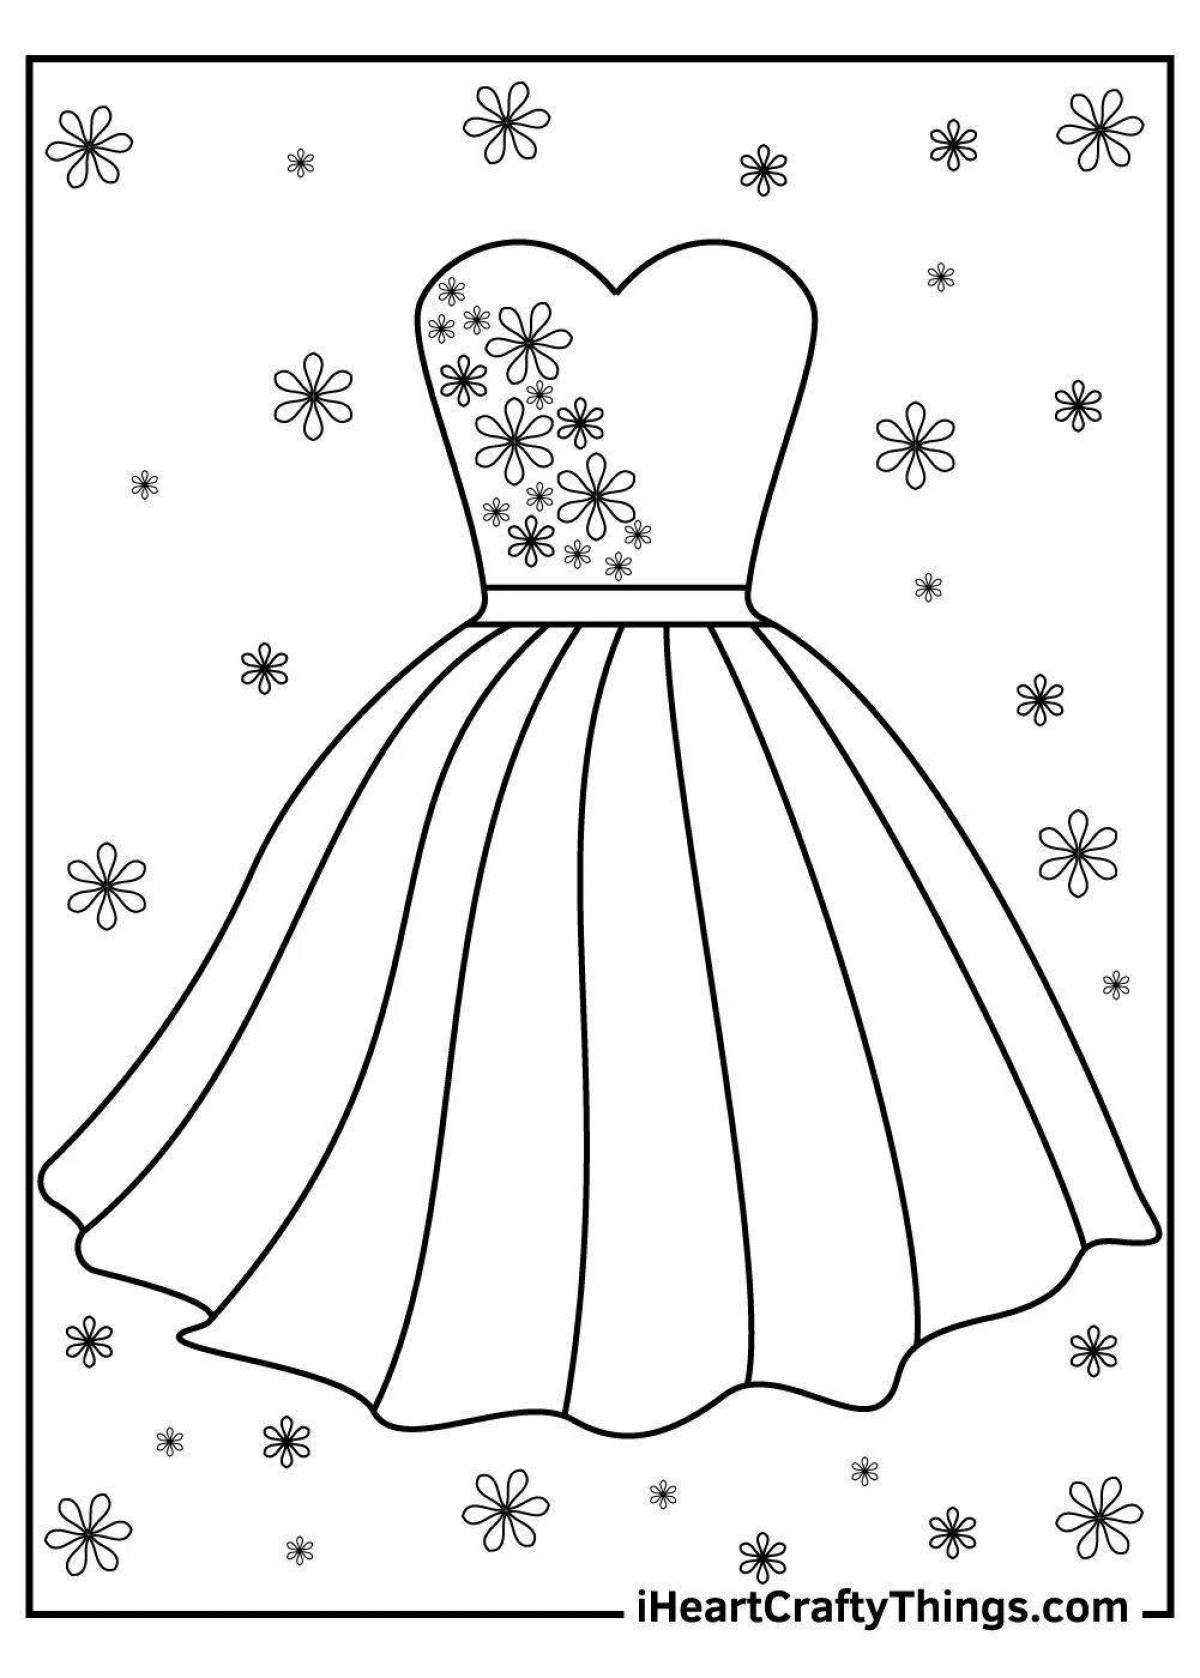 Adorable Dress Pattern Coloring Page